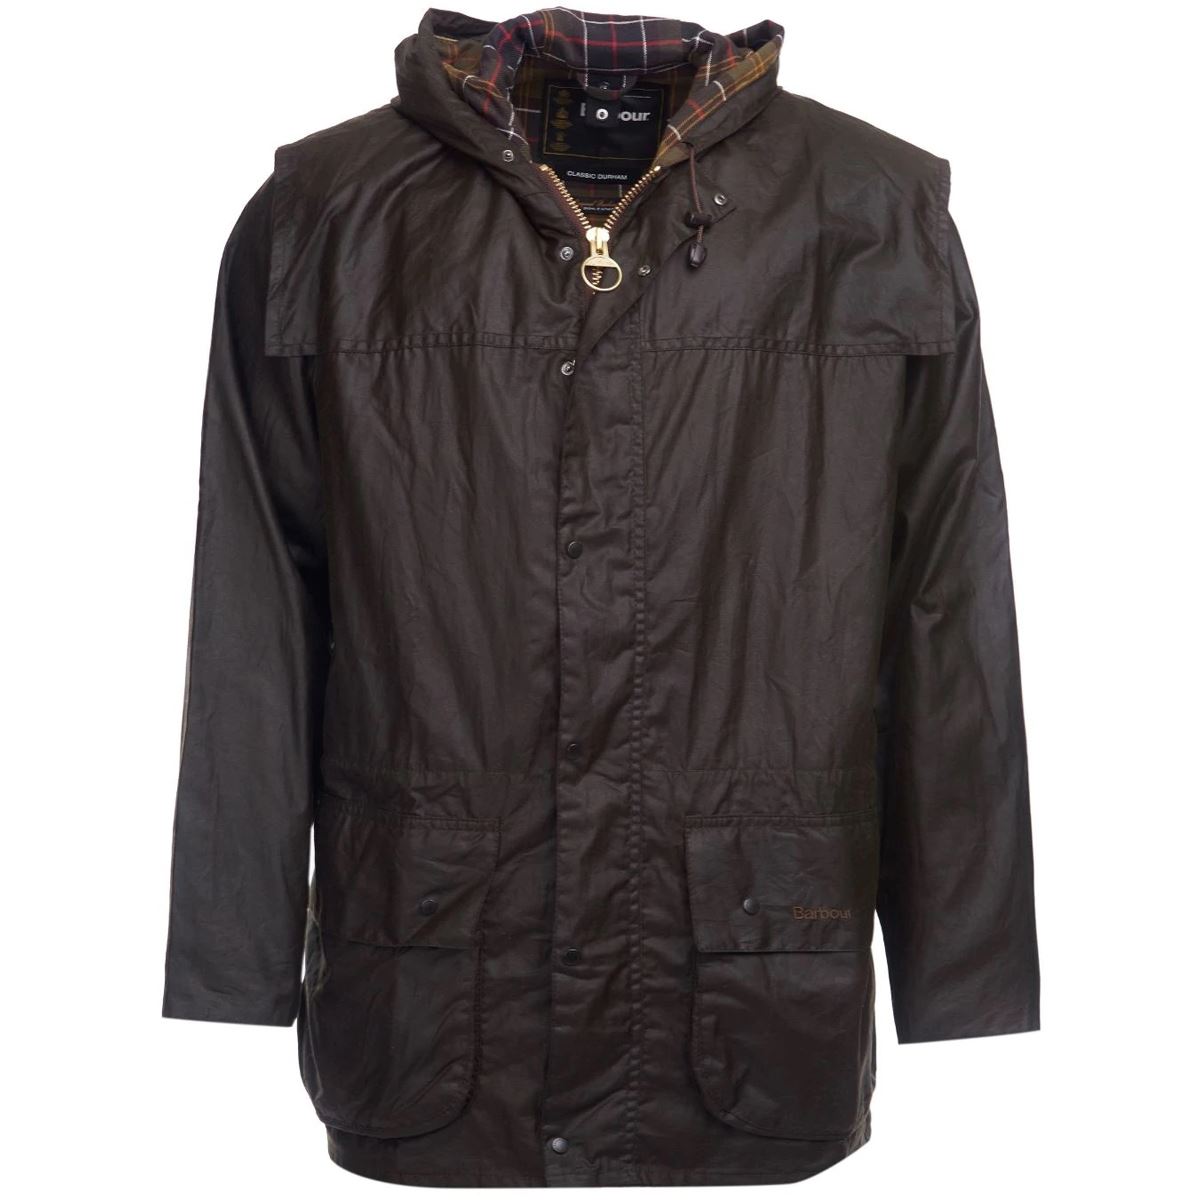 What is the reputation of the barbour durham jacket?